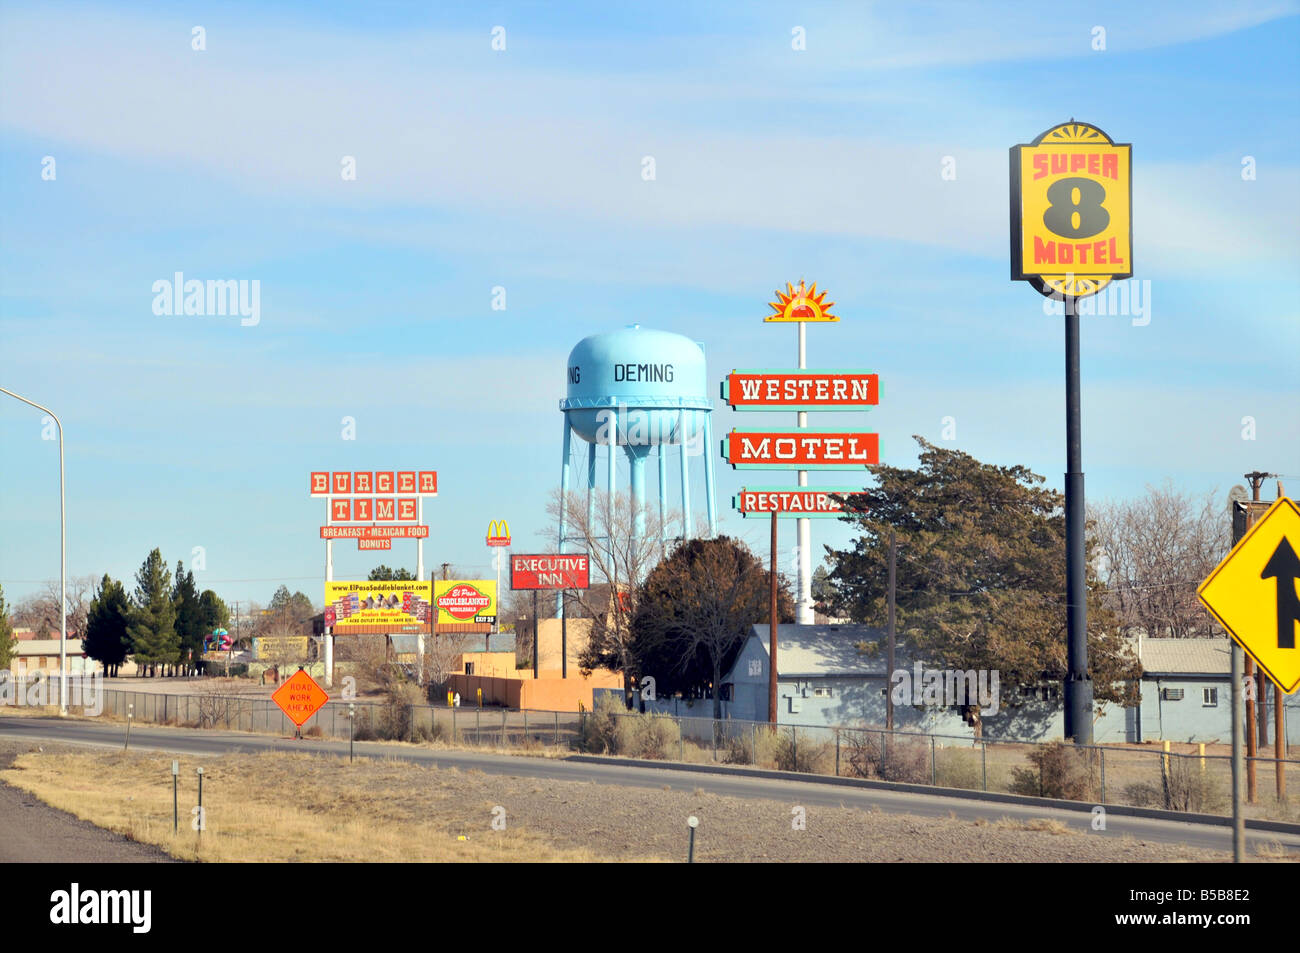 Water tower in Deming, New Mexico Stock Photo